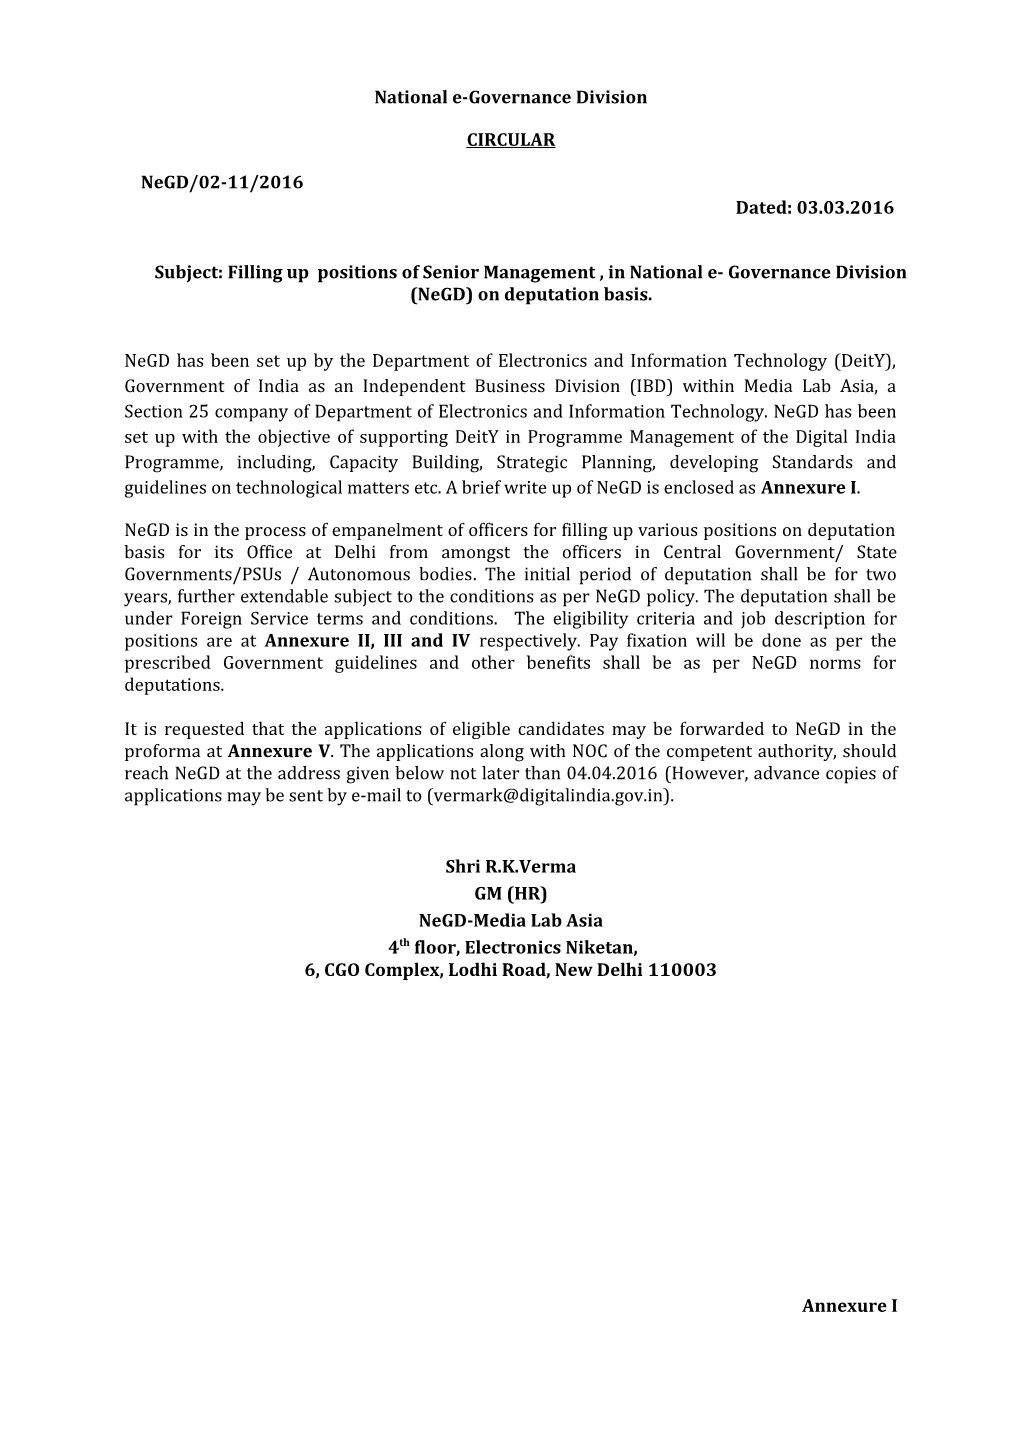 Subject: Filling up Positions of Senior Management , in National E- Governance Division